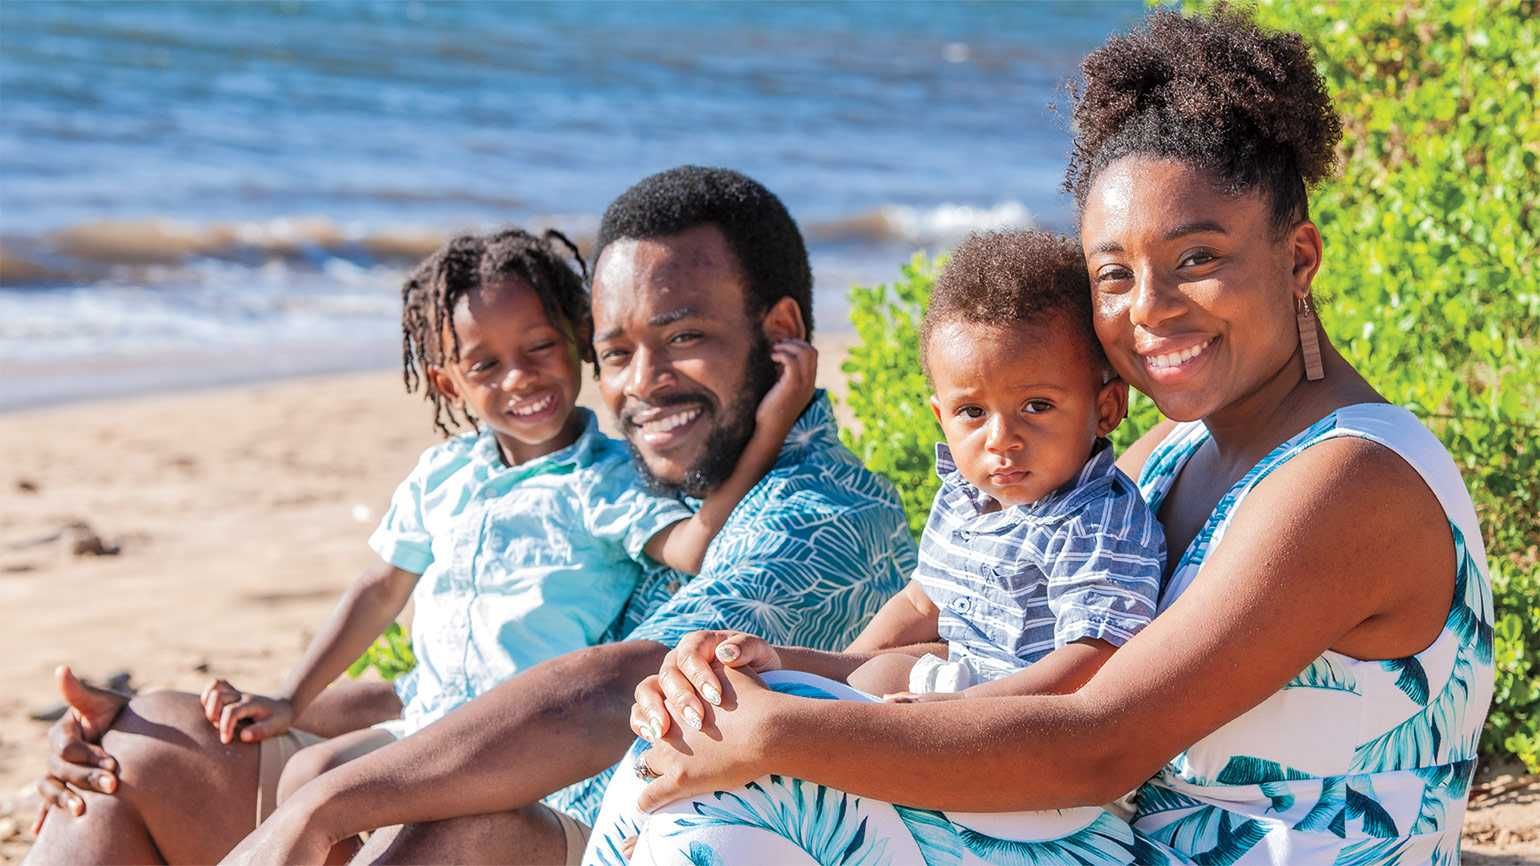 Tiera Fletcher and her family on the beach sharing her god encounter and story of faith